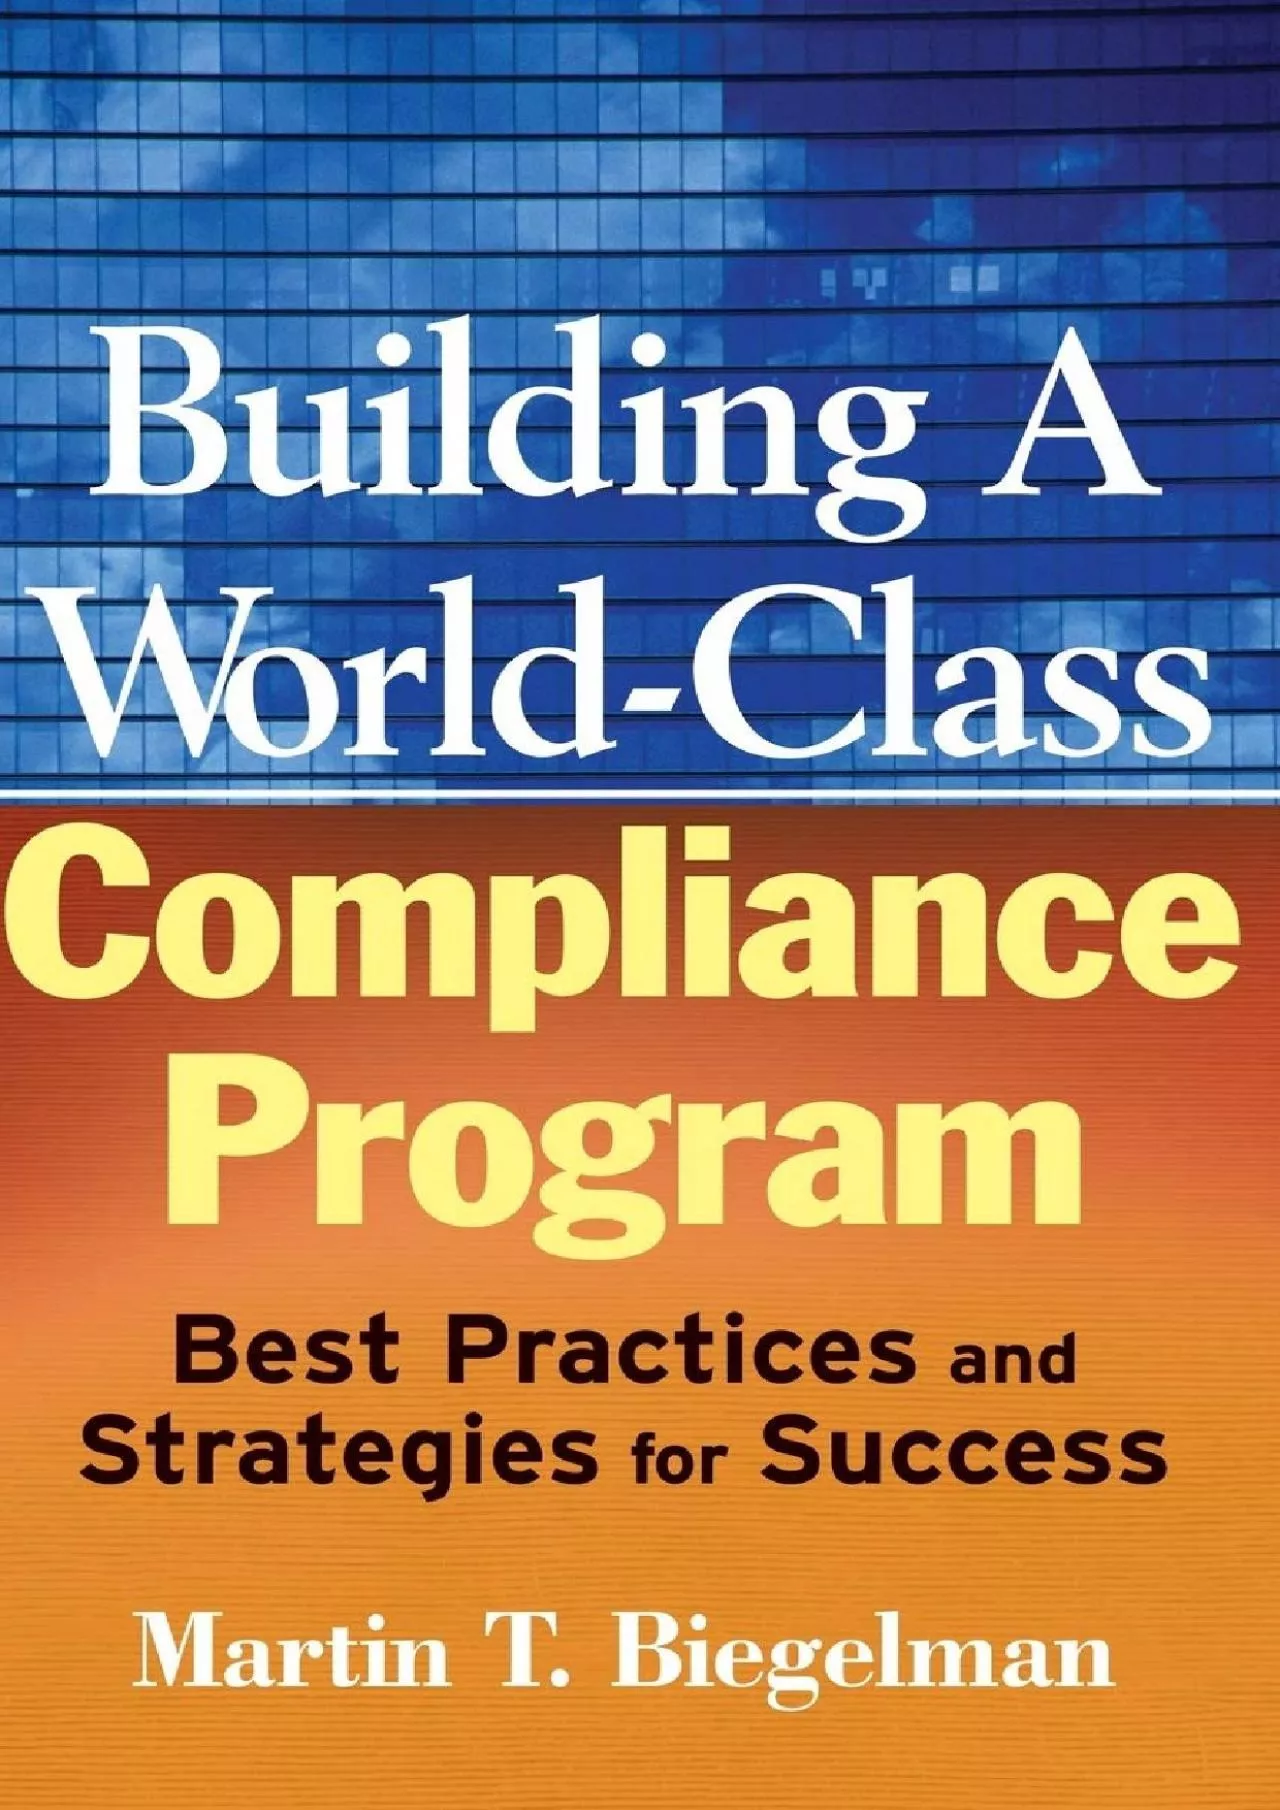 (BOOS)-Building a World-Class Compliance Program: Best Practices and Strategies for Success